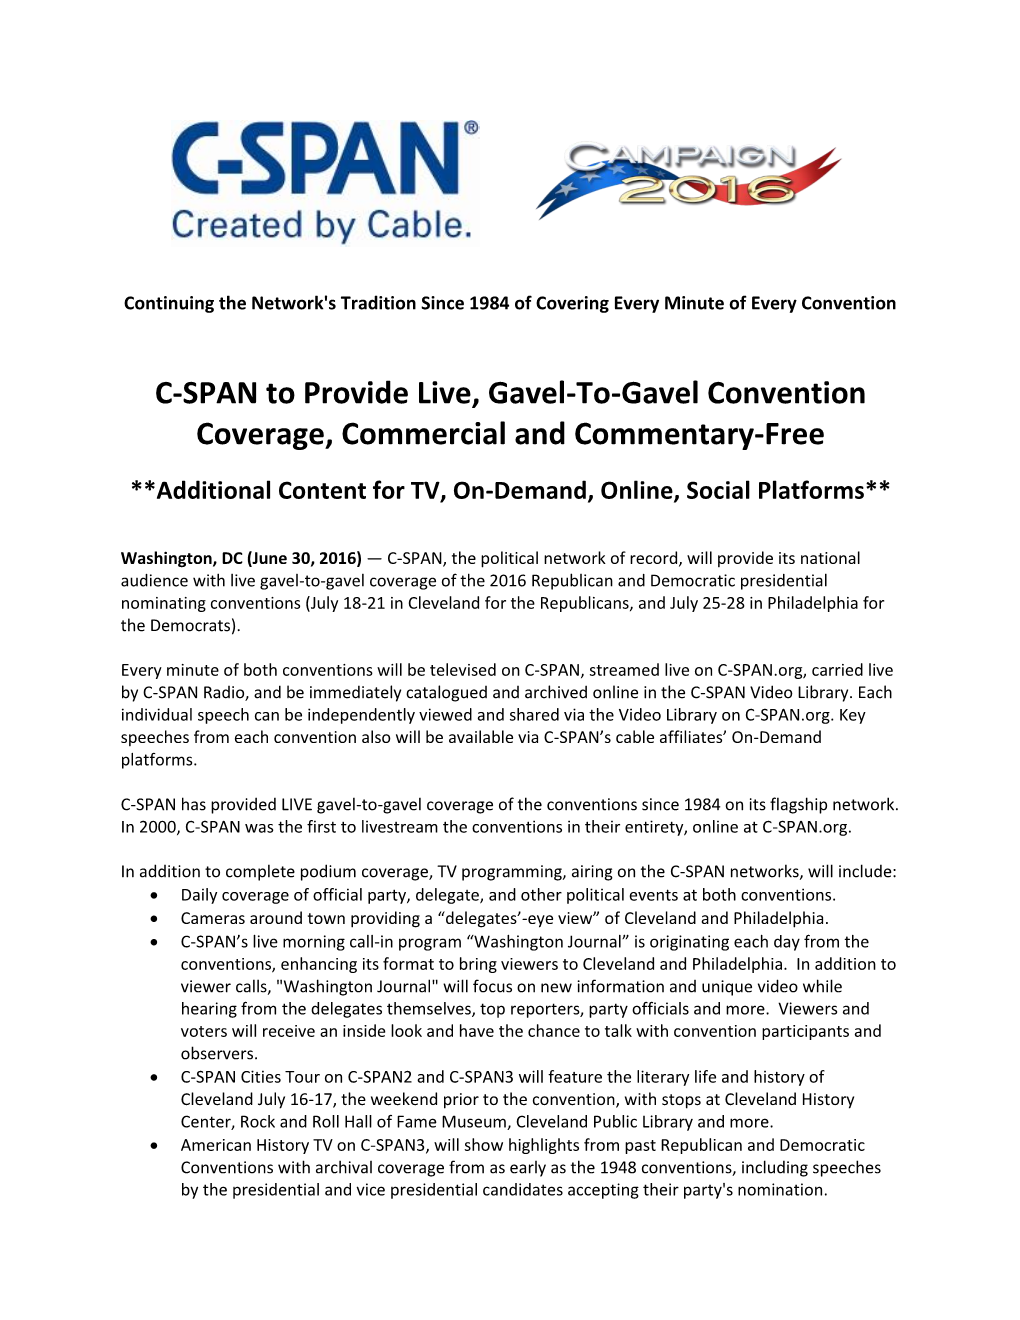 C-SPAN to Provide Live, Gavel-To-Gavel Convention Coverage, Commercial and Commentary-Free